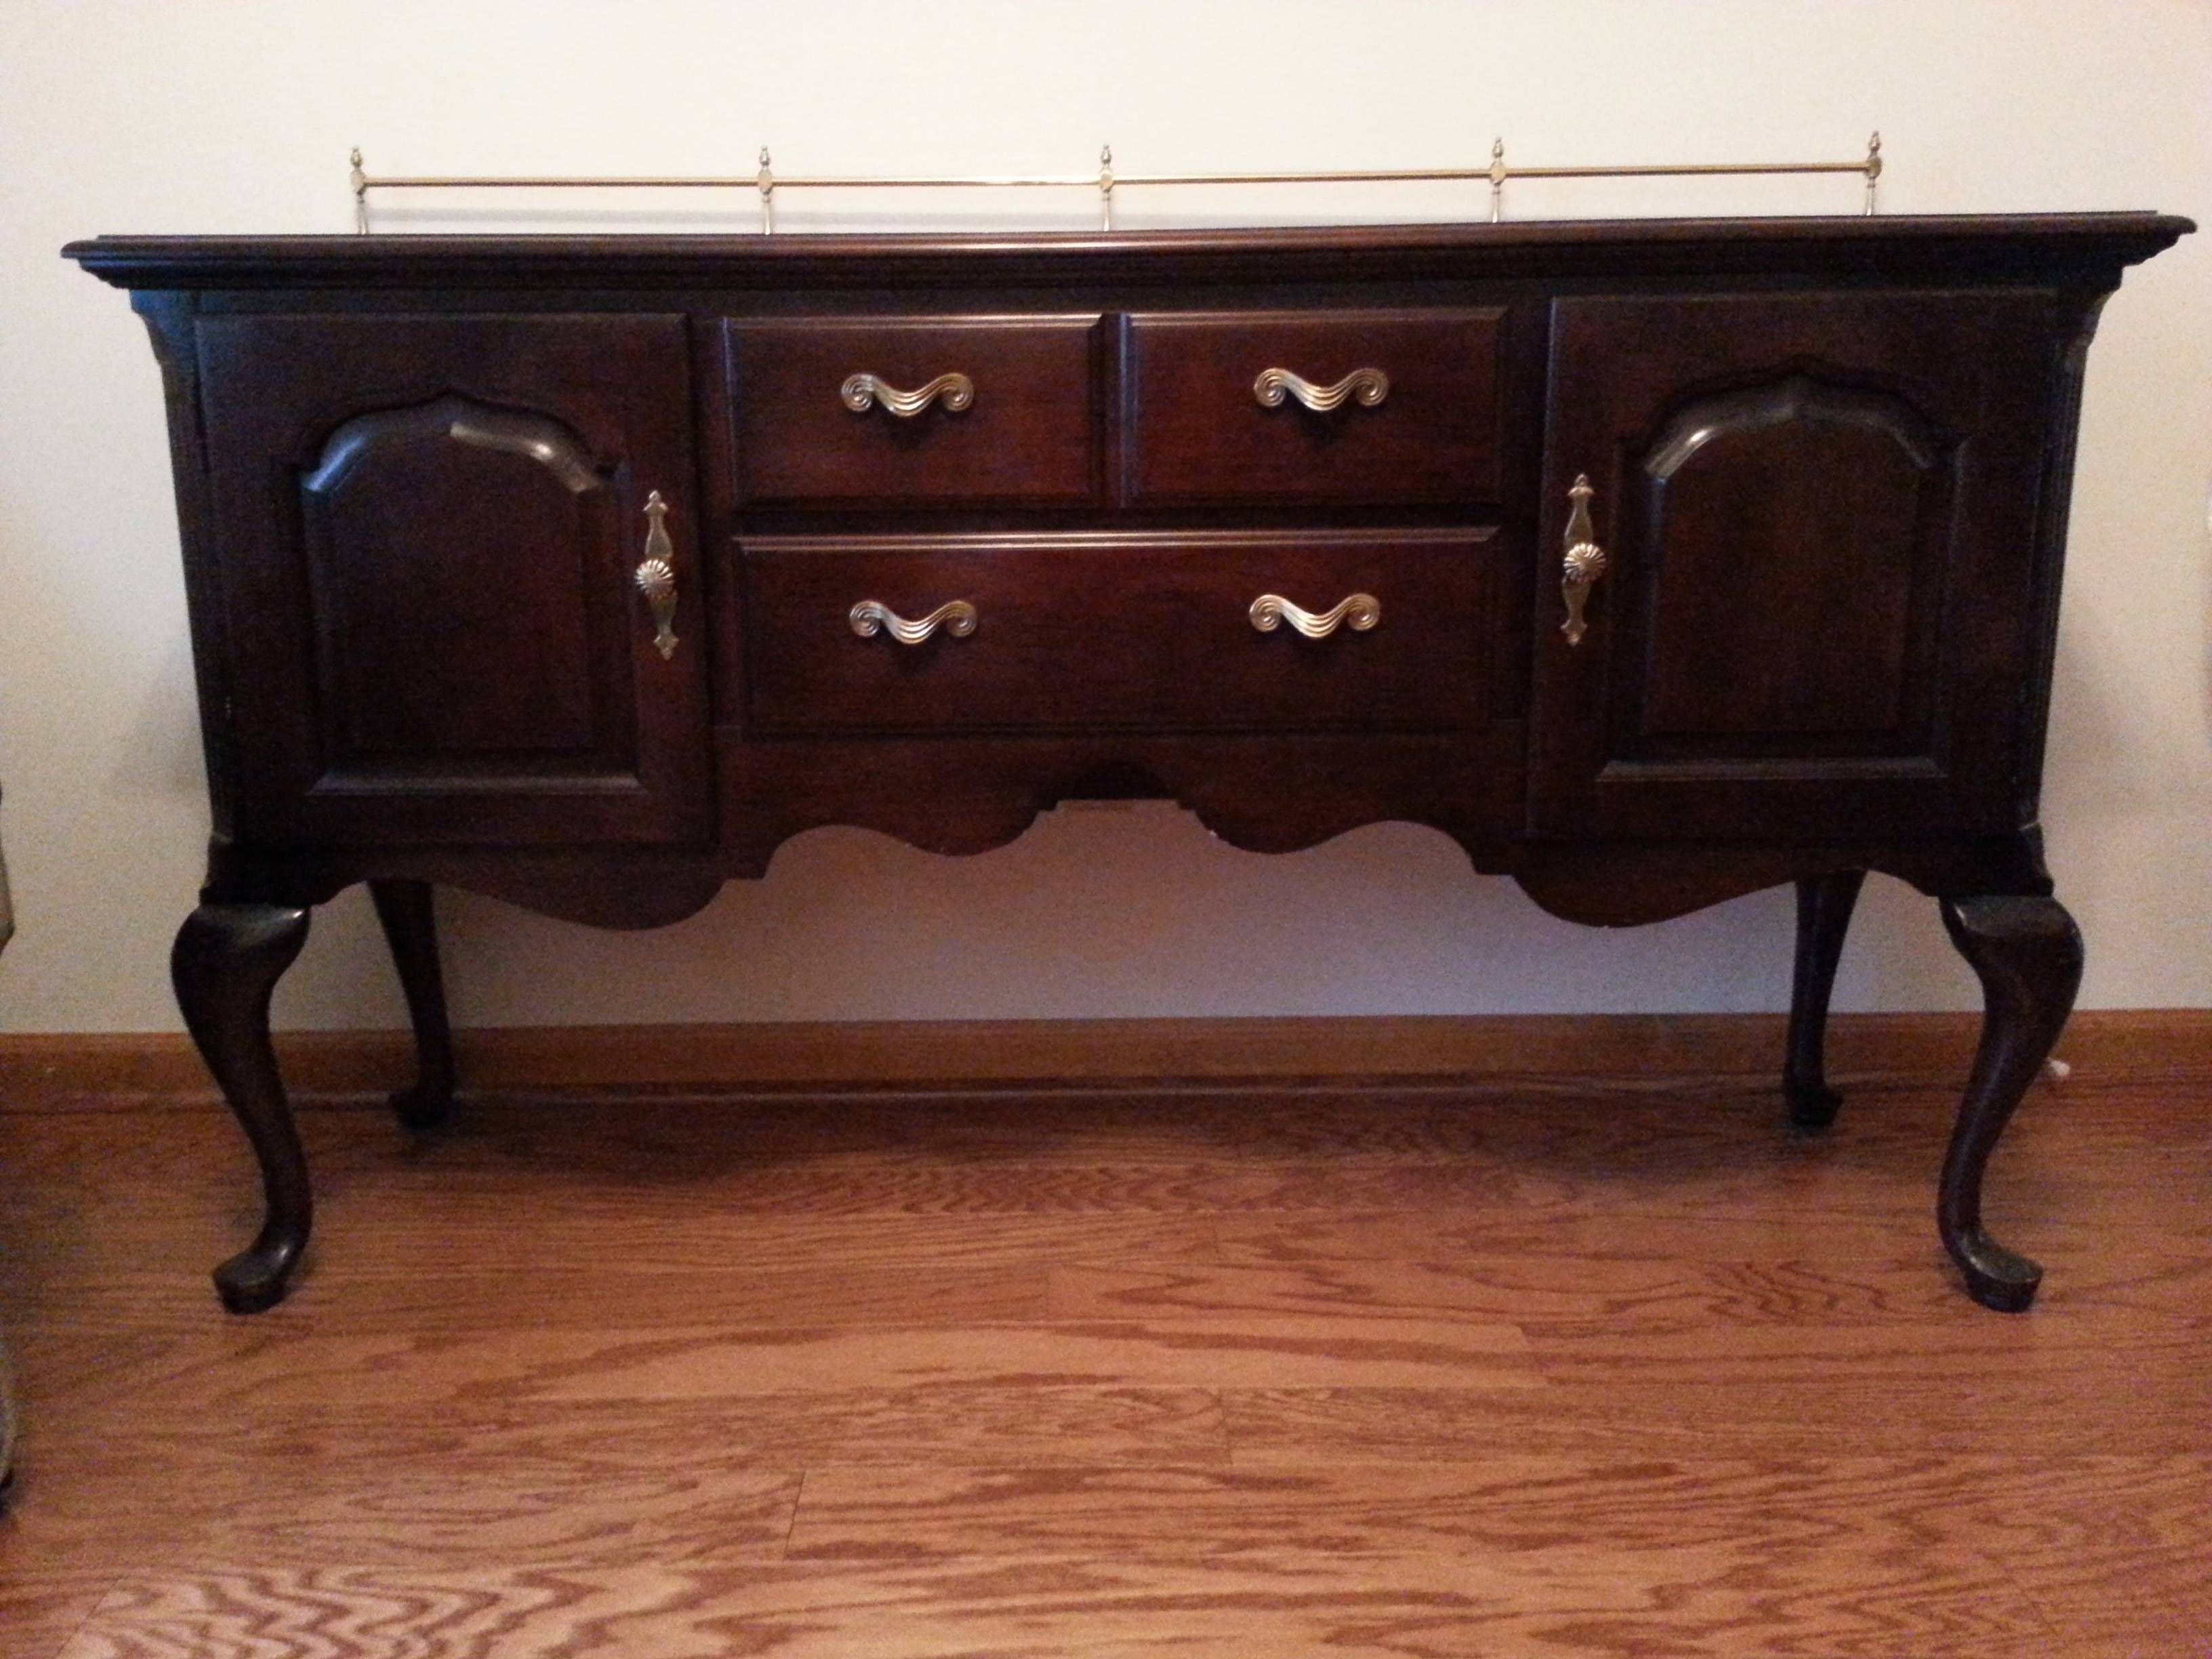 Furniture: Antique Dark Sideboard Buffet With Three Drawers On With Regard To Buffet Server Sideboards (View 10 of 15)